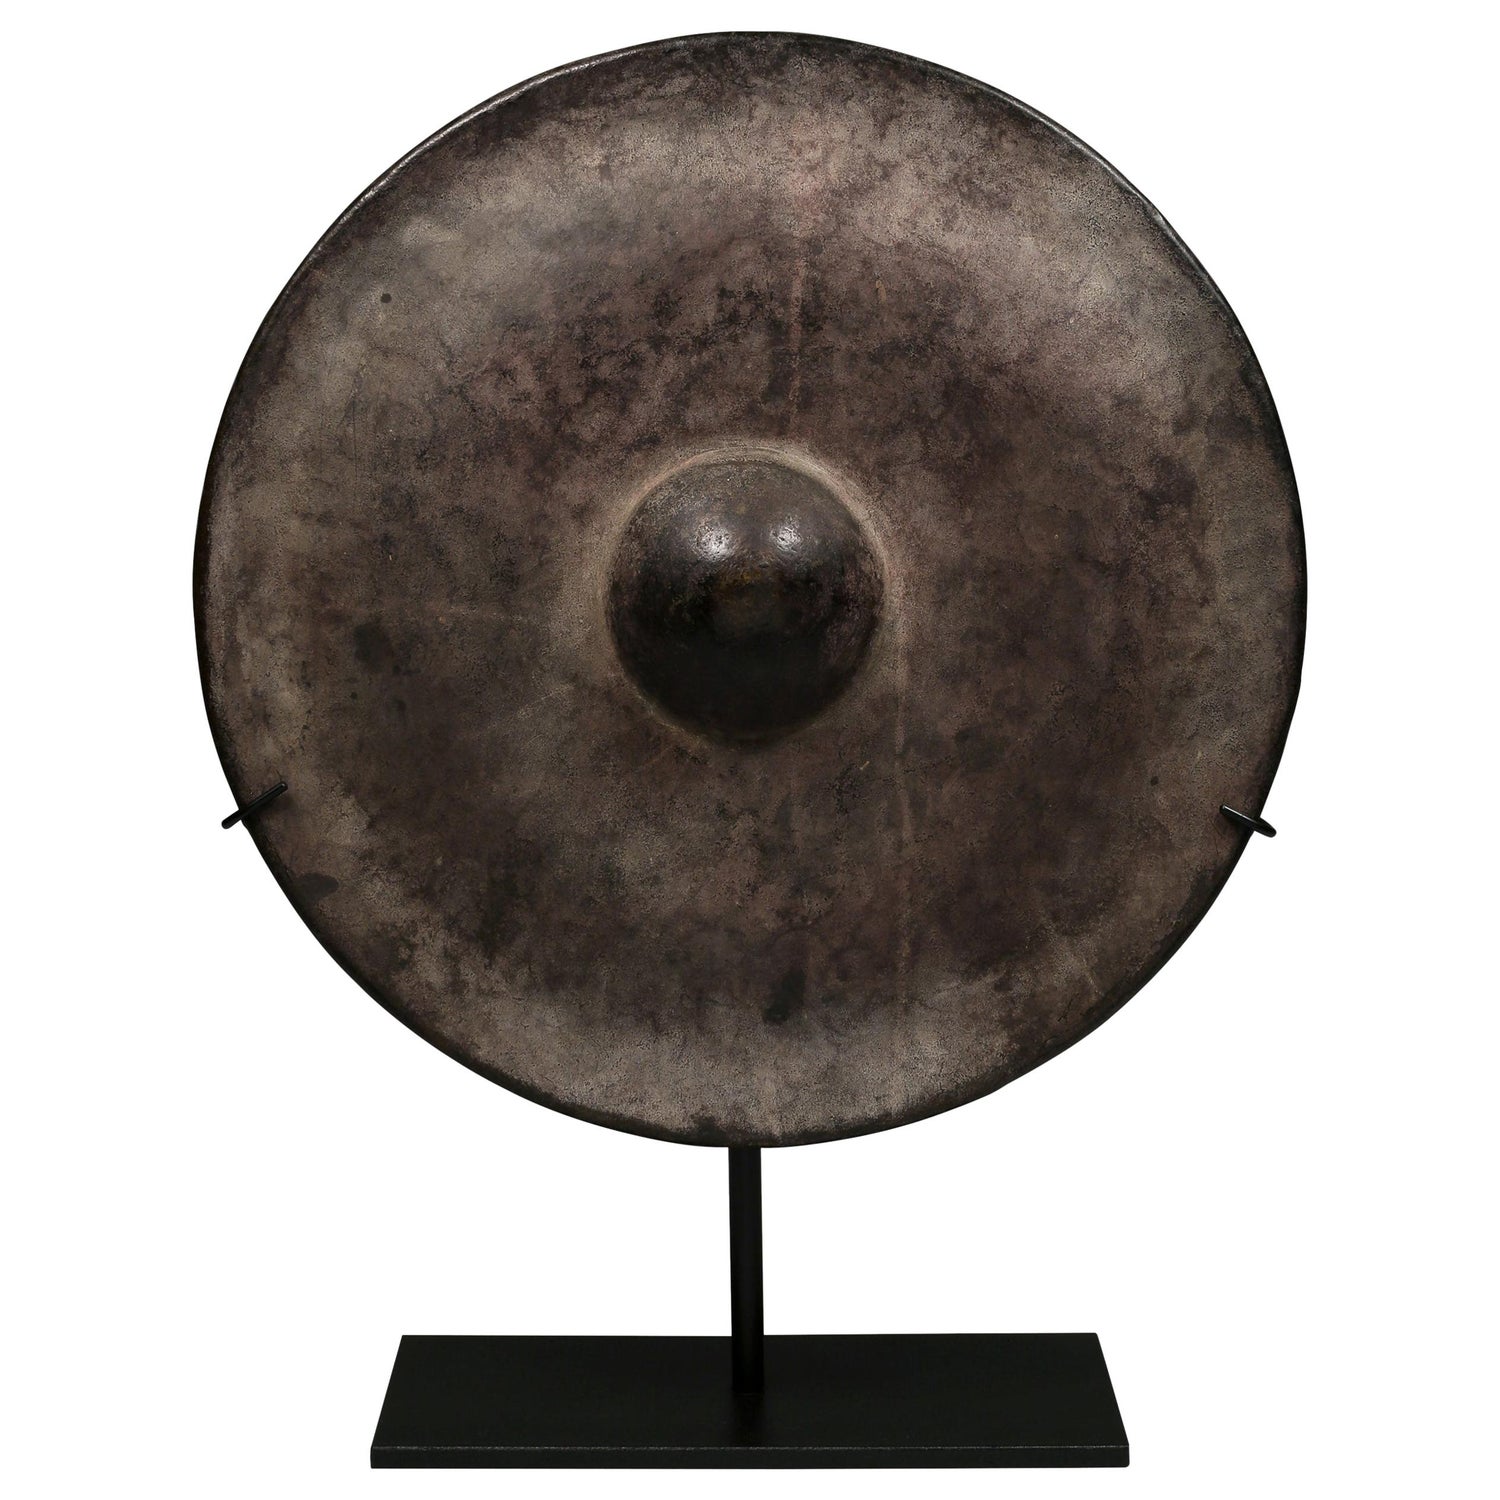 Thai Gong - 5 For Sale on 1stDibs